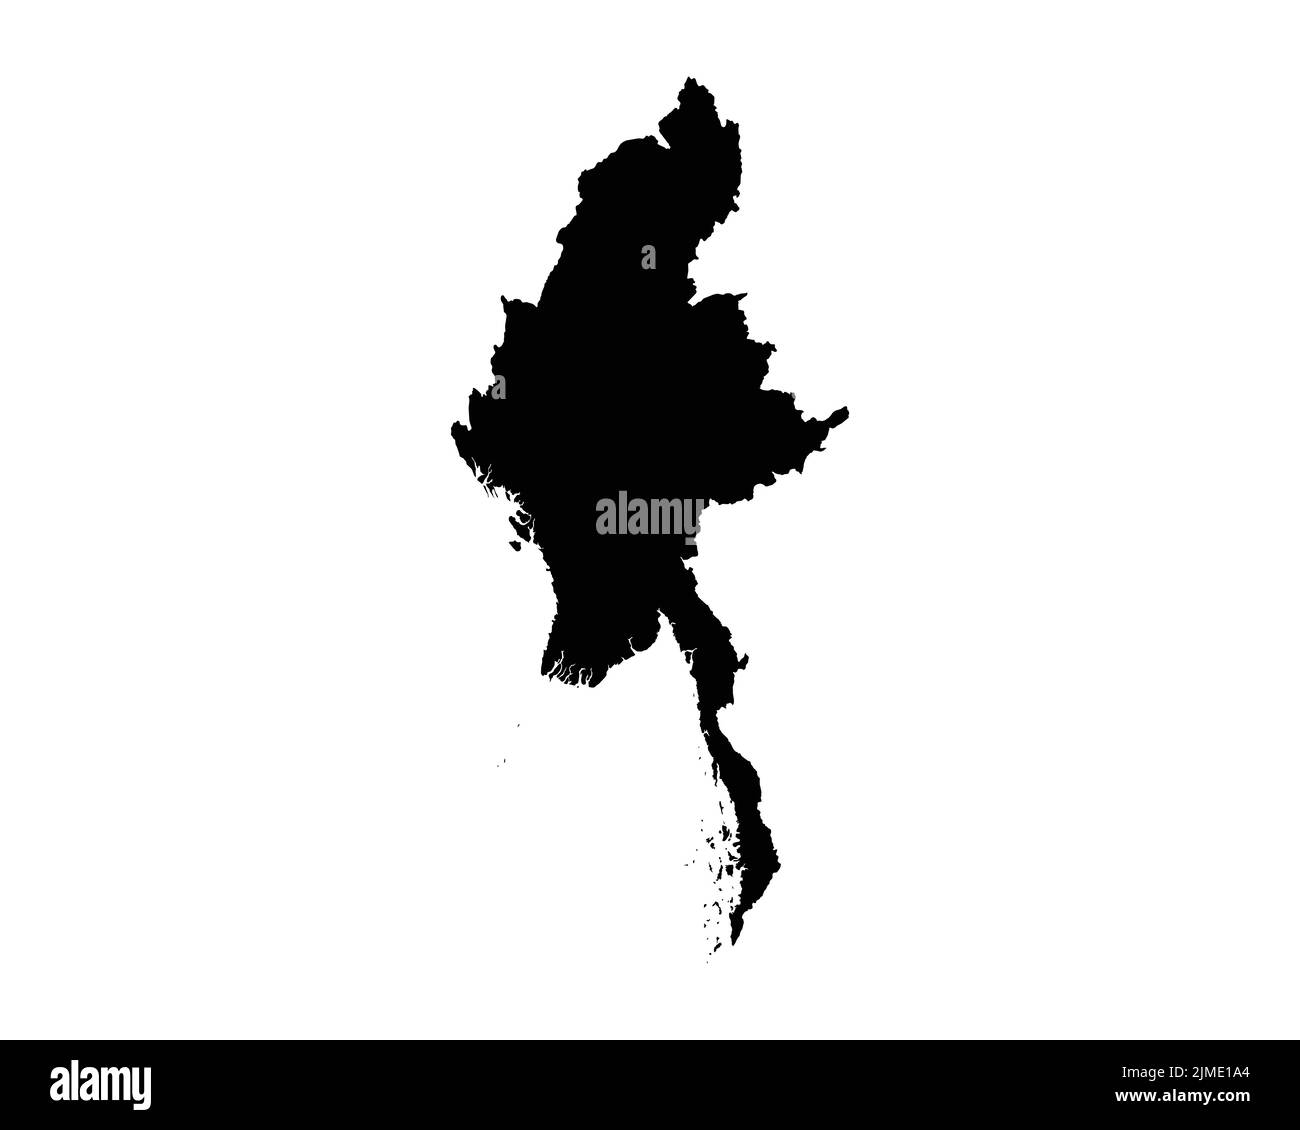 Myanmar Map. Burma Country Map. Black and White Burmese National Nation Outline Geography Border Boundary Shape Territory Vector Illustration EPS Clip Stock Vector